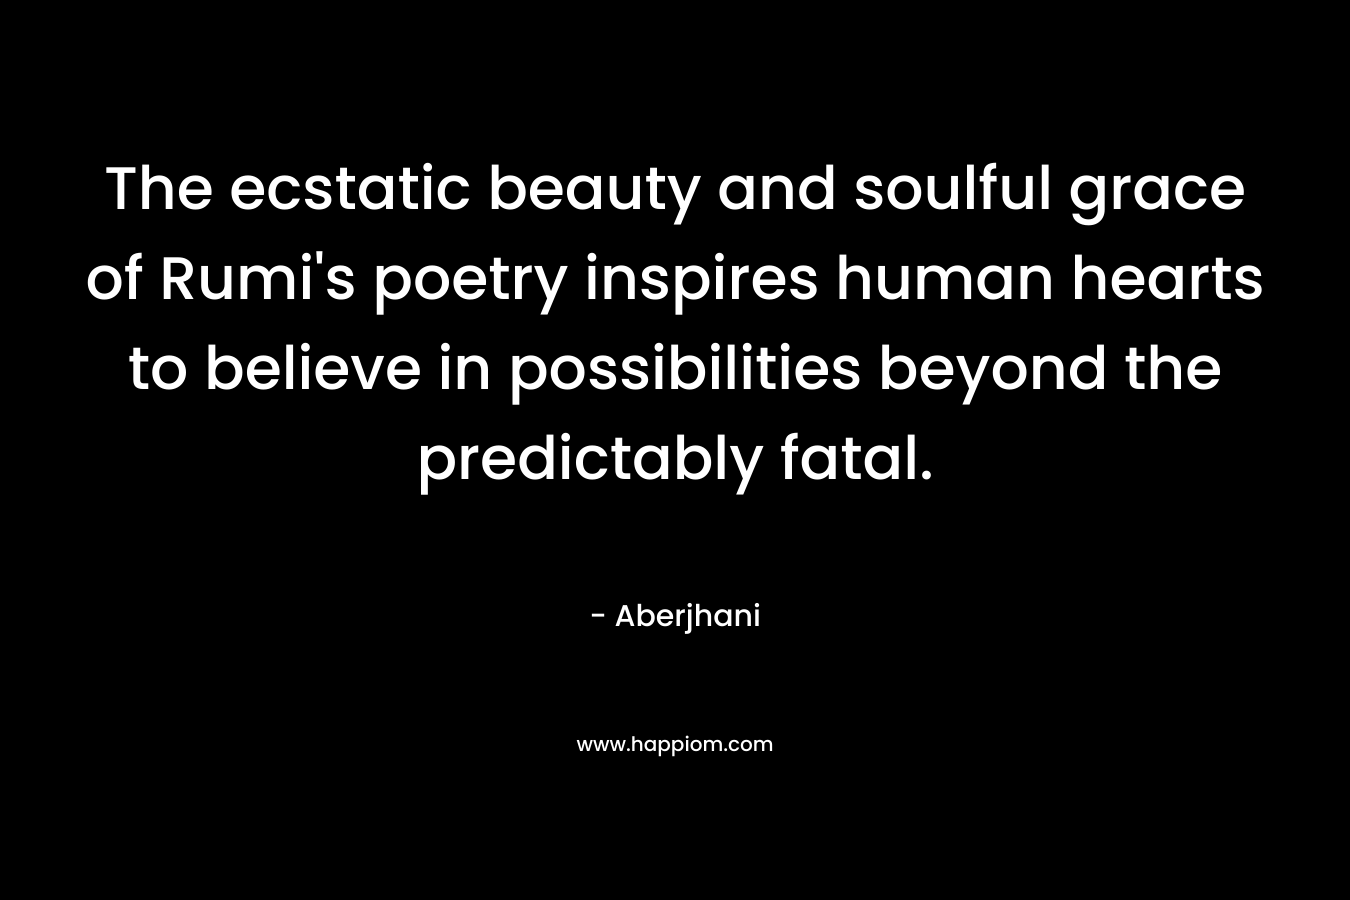 The ecstatic beauty and soulful grace of Rumi's poetry inspires human hearts to believe in possibilities beyond the predictably fatal.